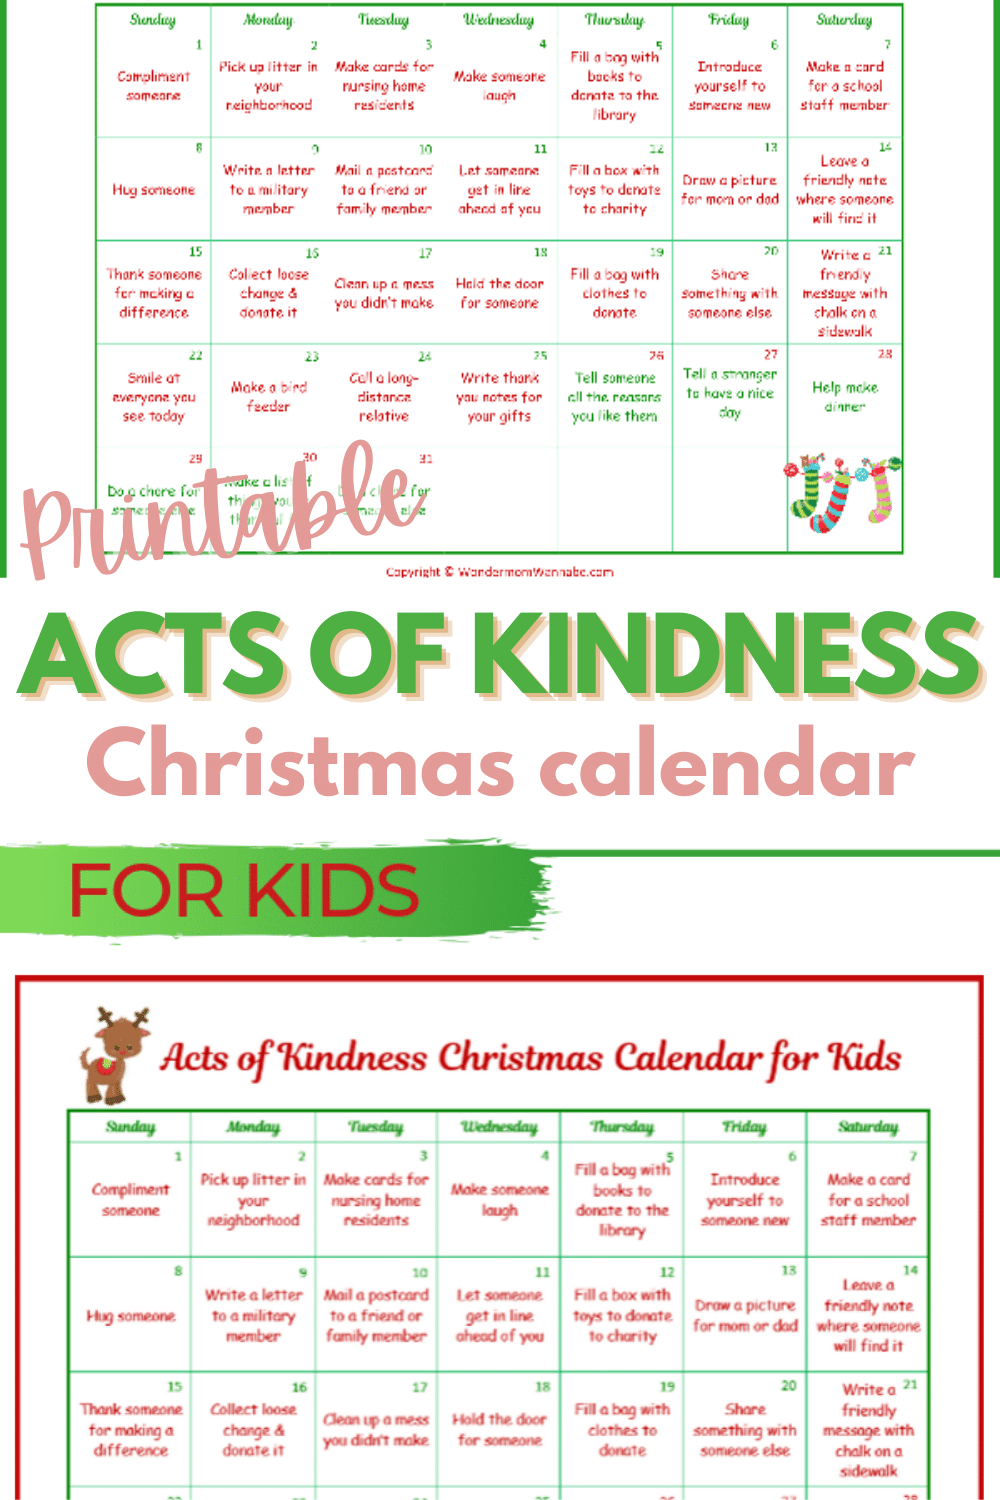 This random acts of kindness Christmas calendar is designed just for kids! What a great way to show kids that you're never too young to make a positive impact. #printables #RAKprintables #Christmasprintables #Kidsprintables #Randomactsofkindness via @wondermomwannab